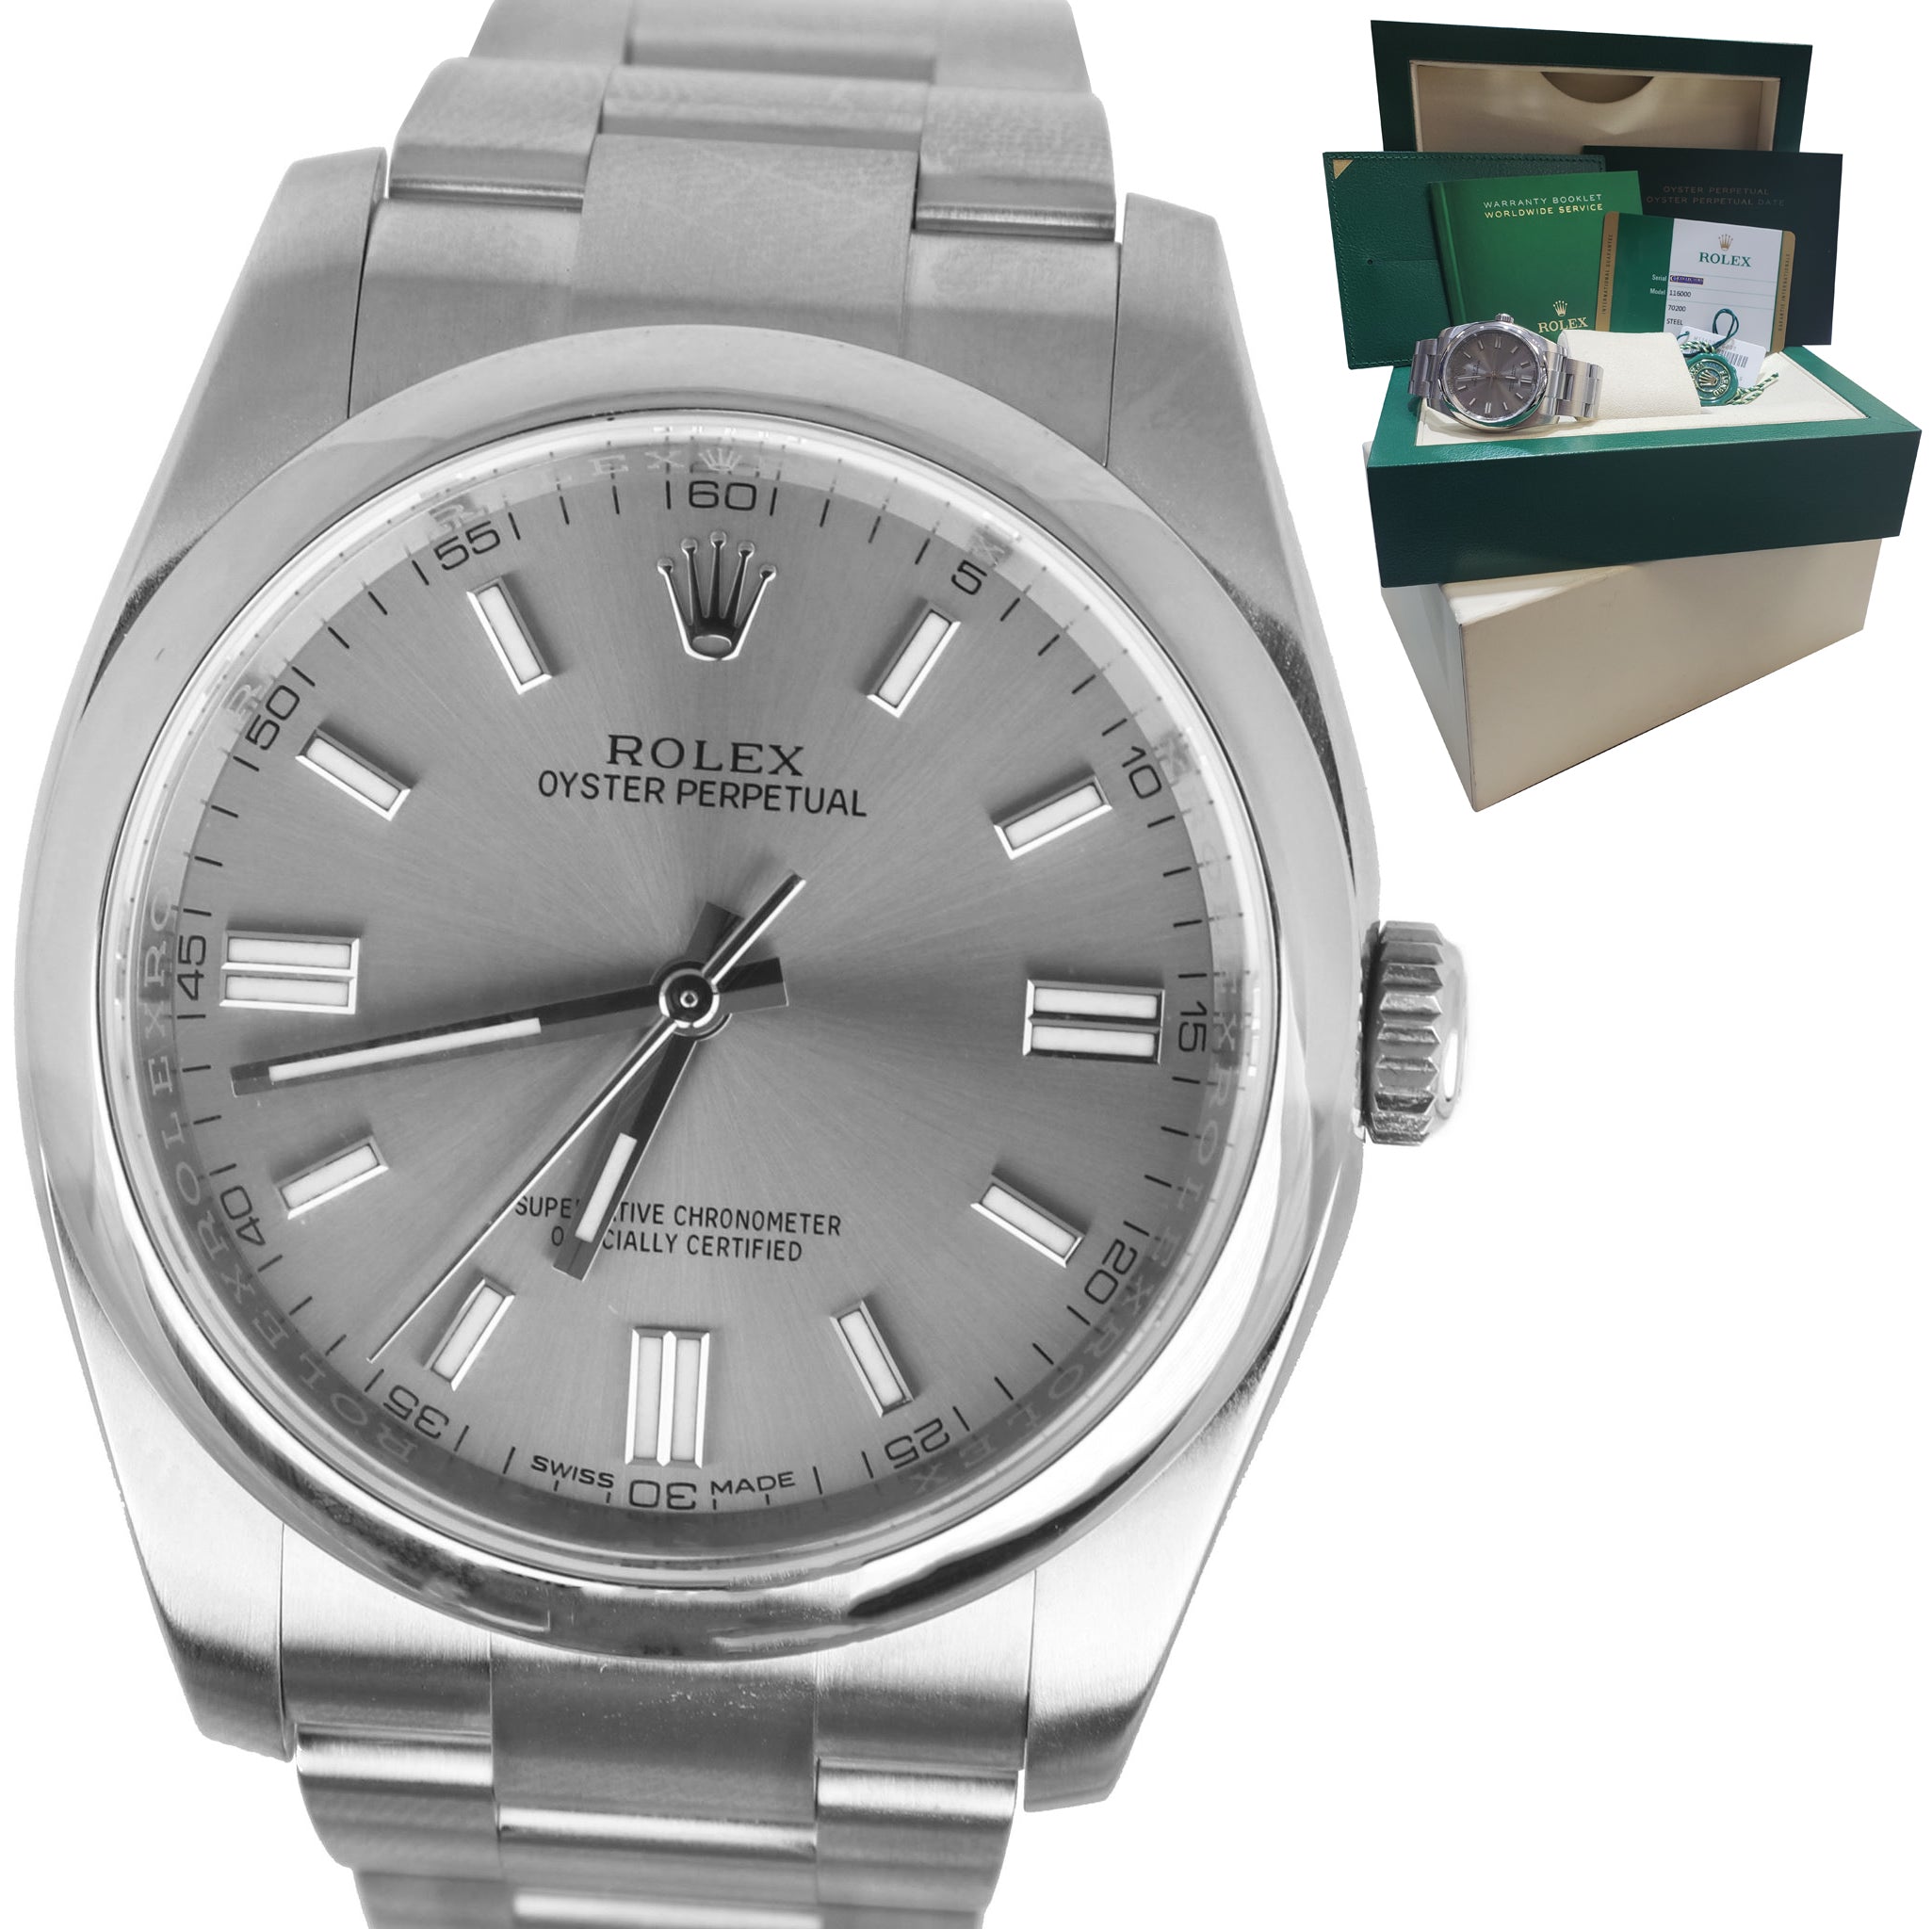 MINT 2019 Rolex Oyster Perpetual 116000 36mm Gray Rhodium Stainless Steel Watch